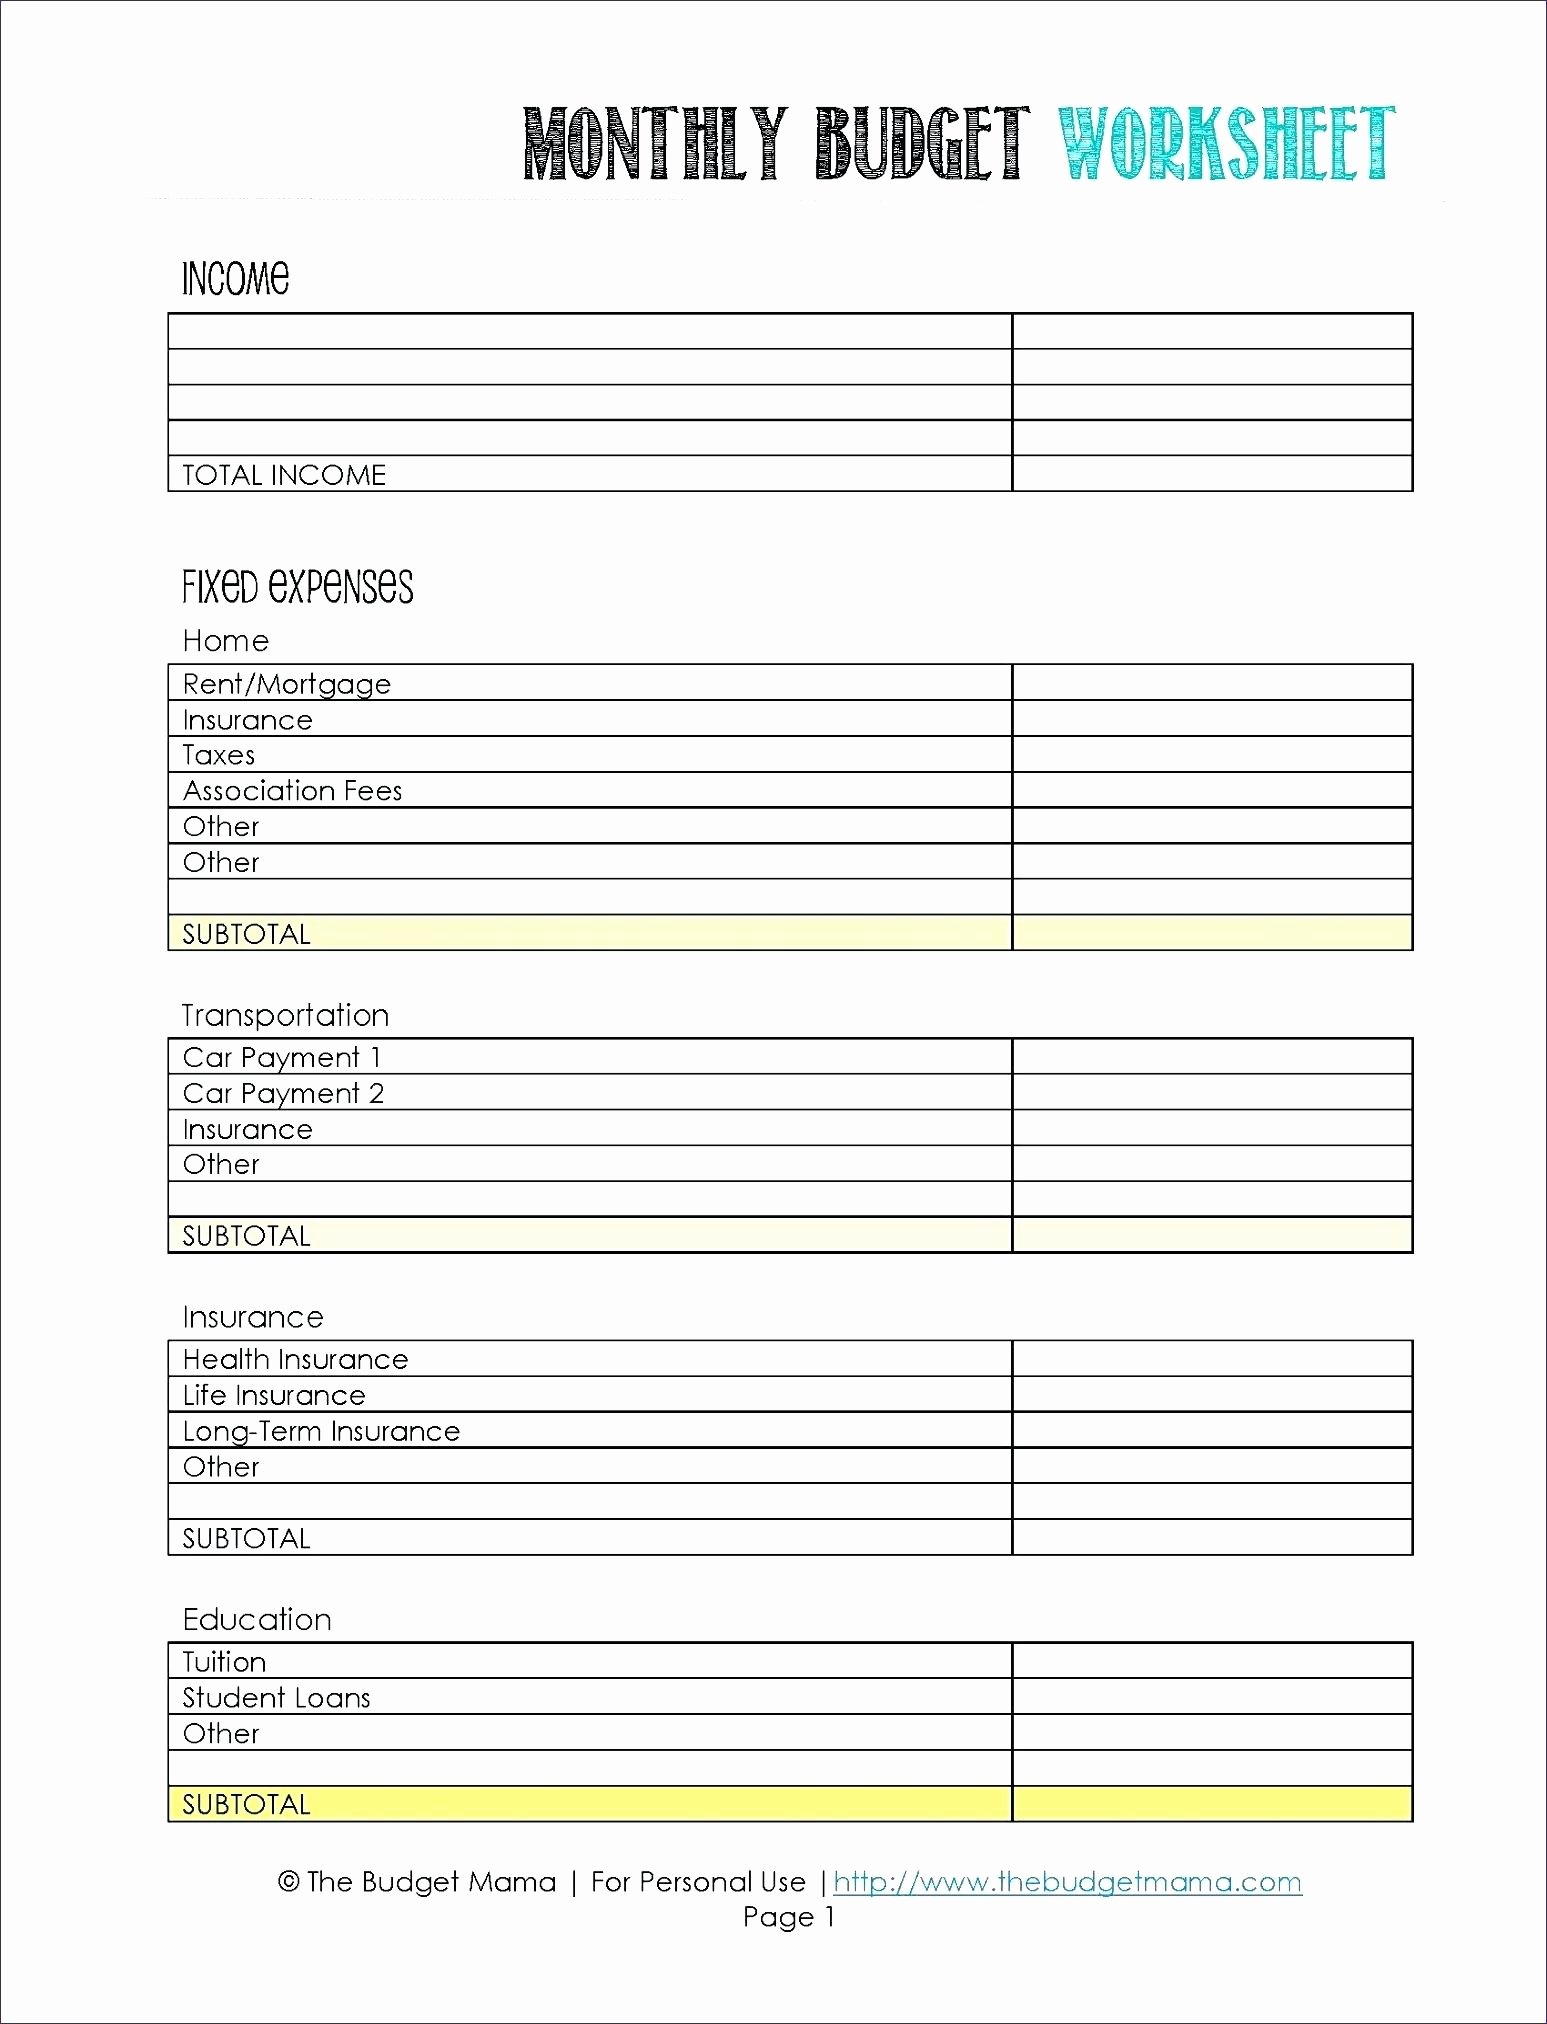 Certificate Of Insurance Tracking Template New Insurance Certificate Tracking Spreadsheet Spreadsheet